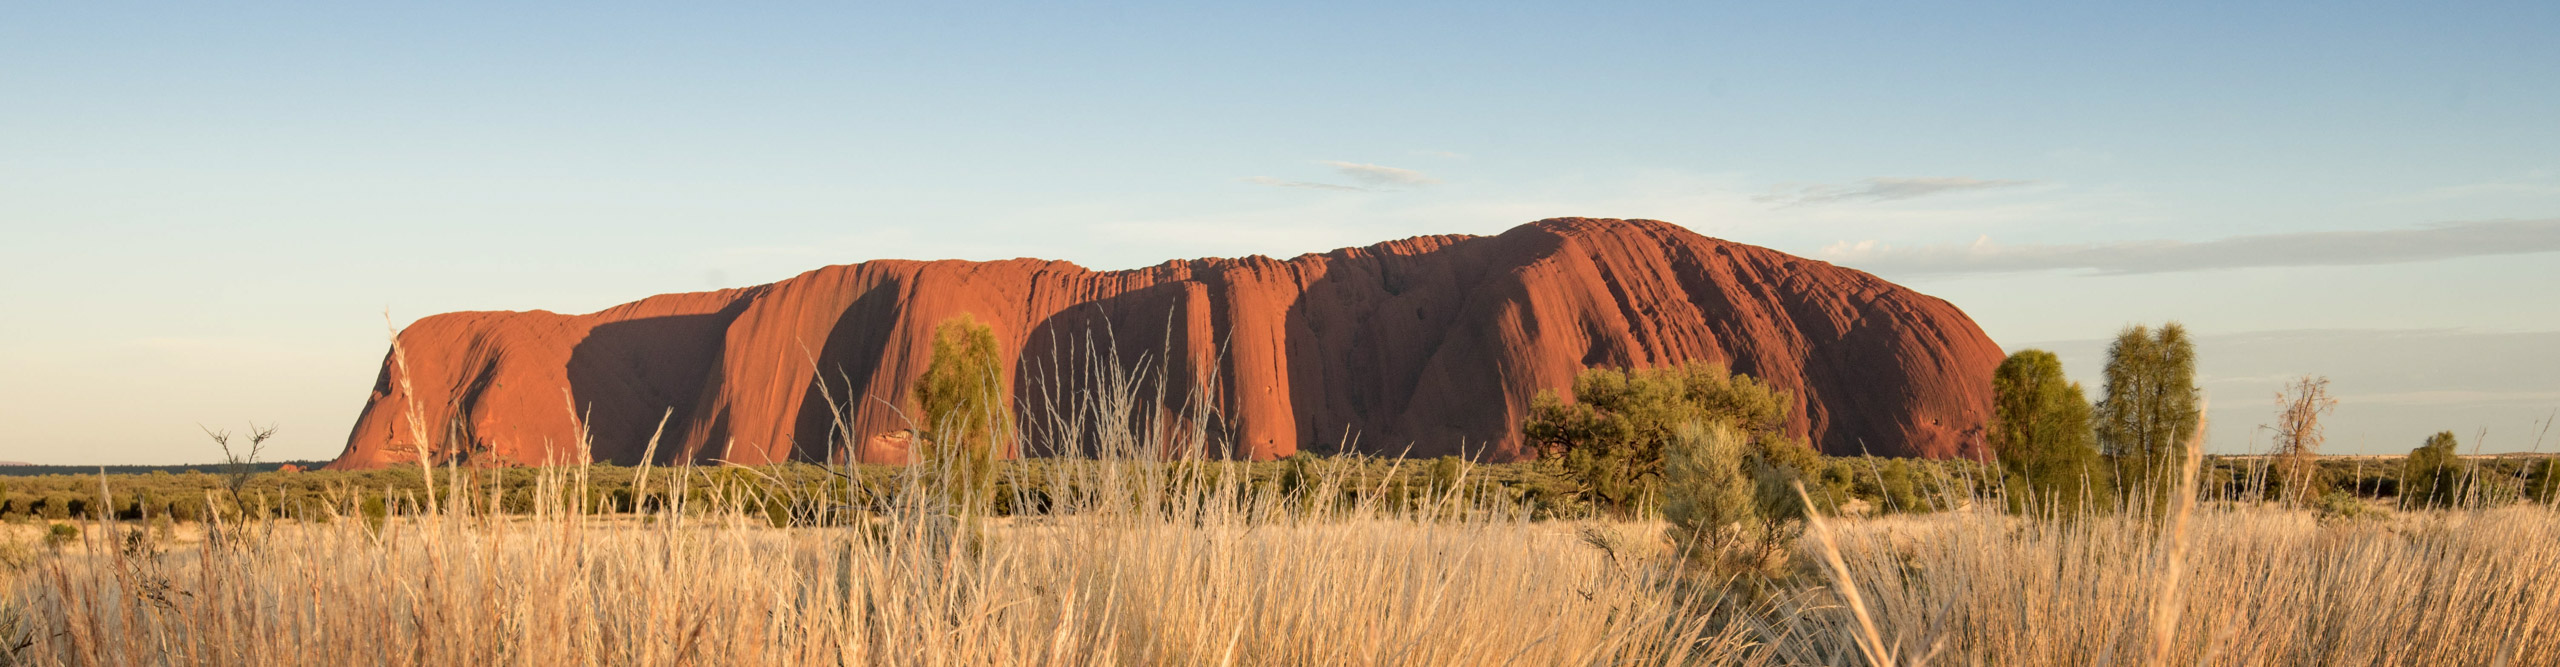 Uluru glowing red at sunset on a clear day in the Northern Territory, Australia 